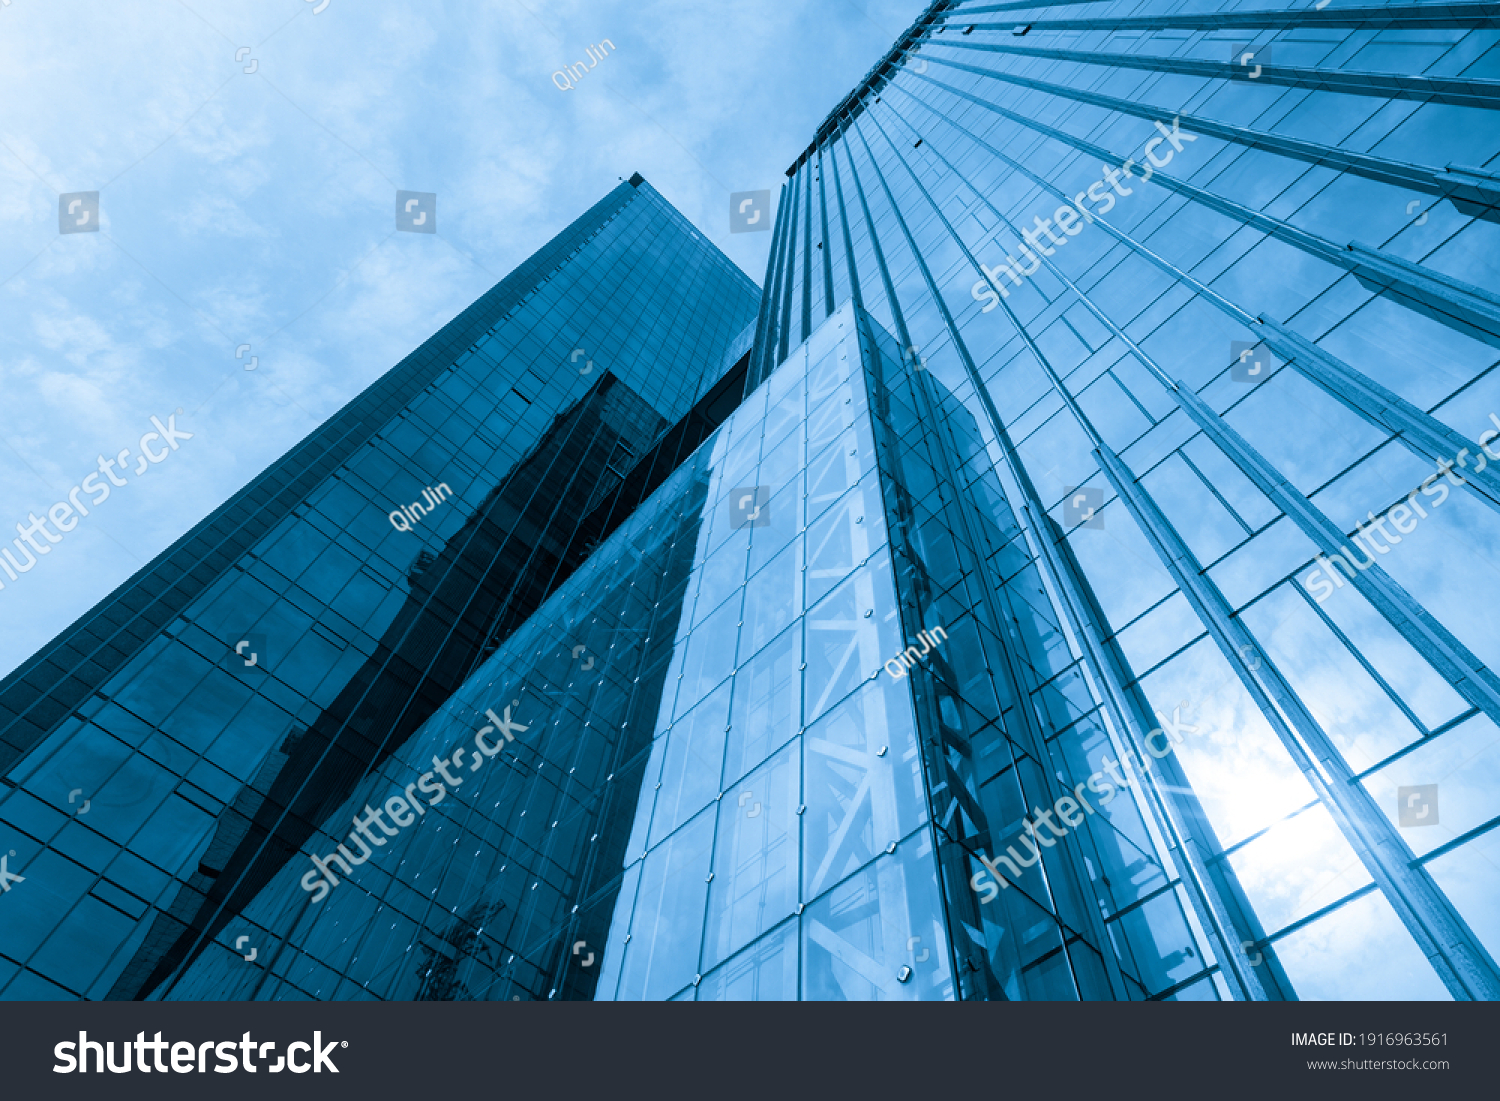 Looking Up Blue Modern Office Building #1916963561